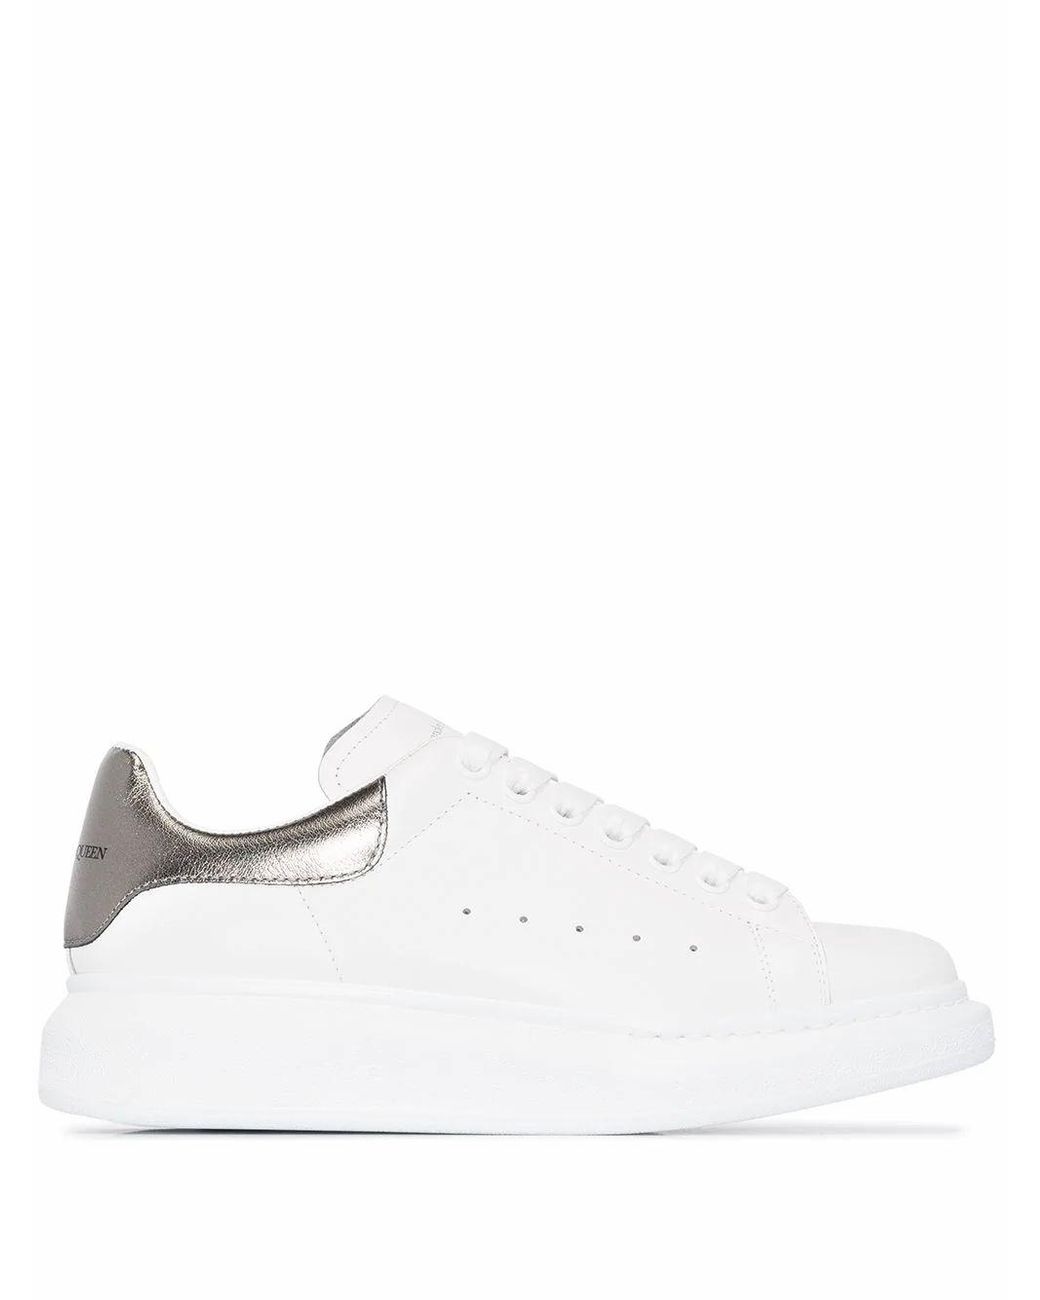 Alexander McQueen Leather Sneakers in White - Lyst